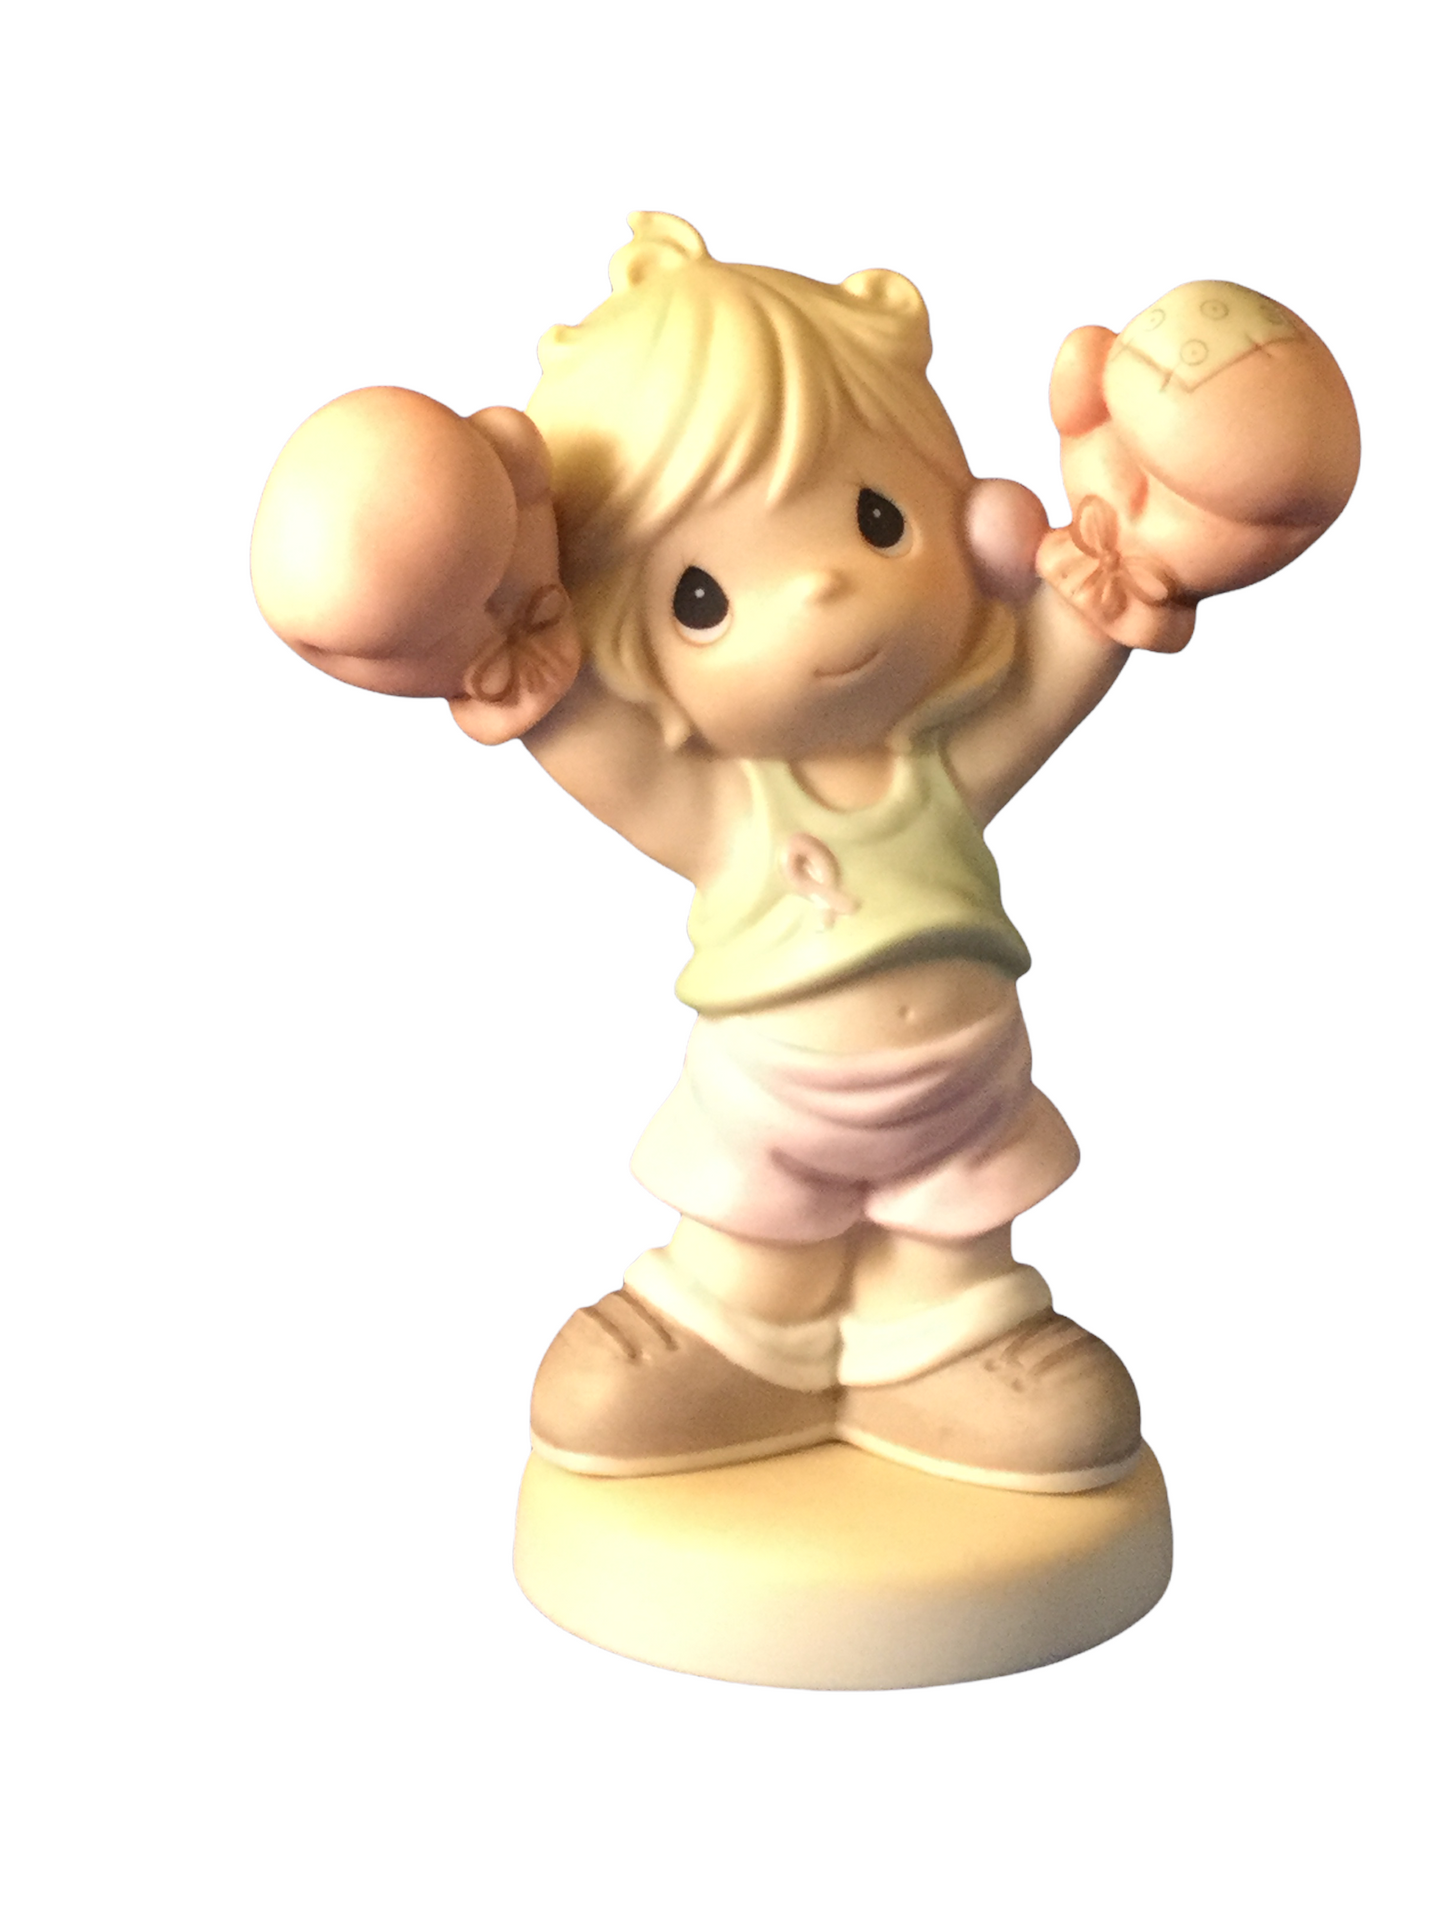 Life is Worth Fighting For - Precious Moment Figurine